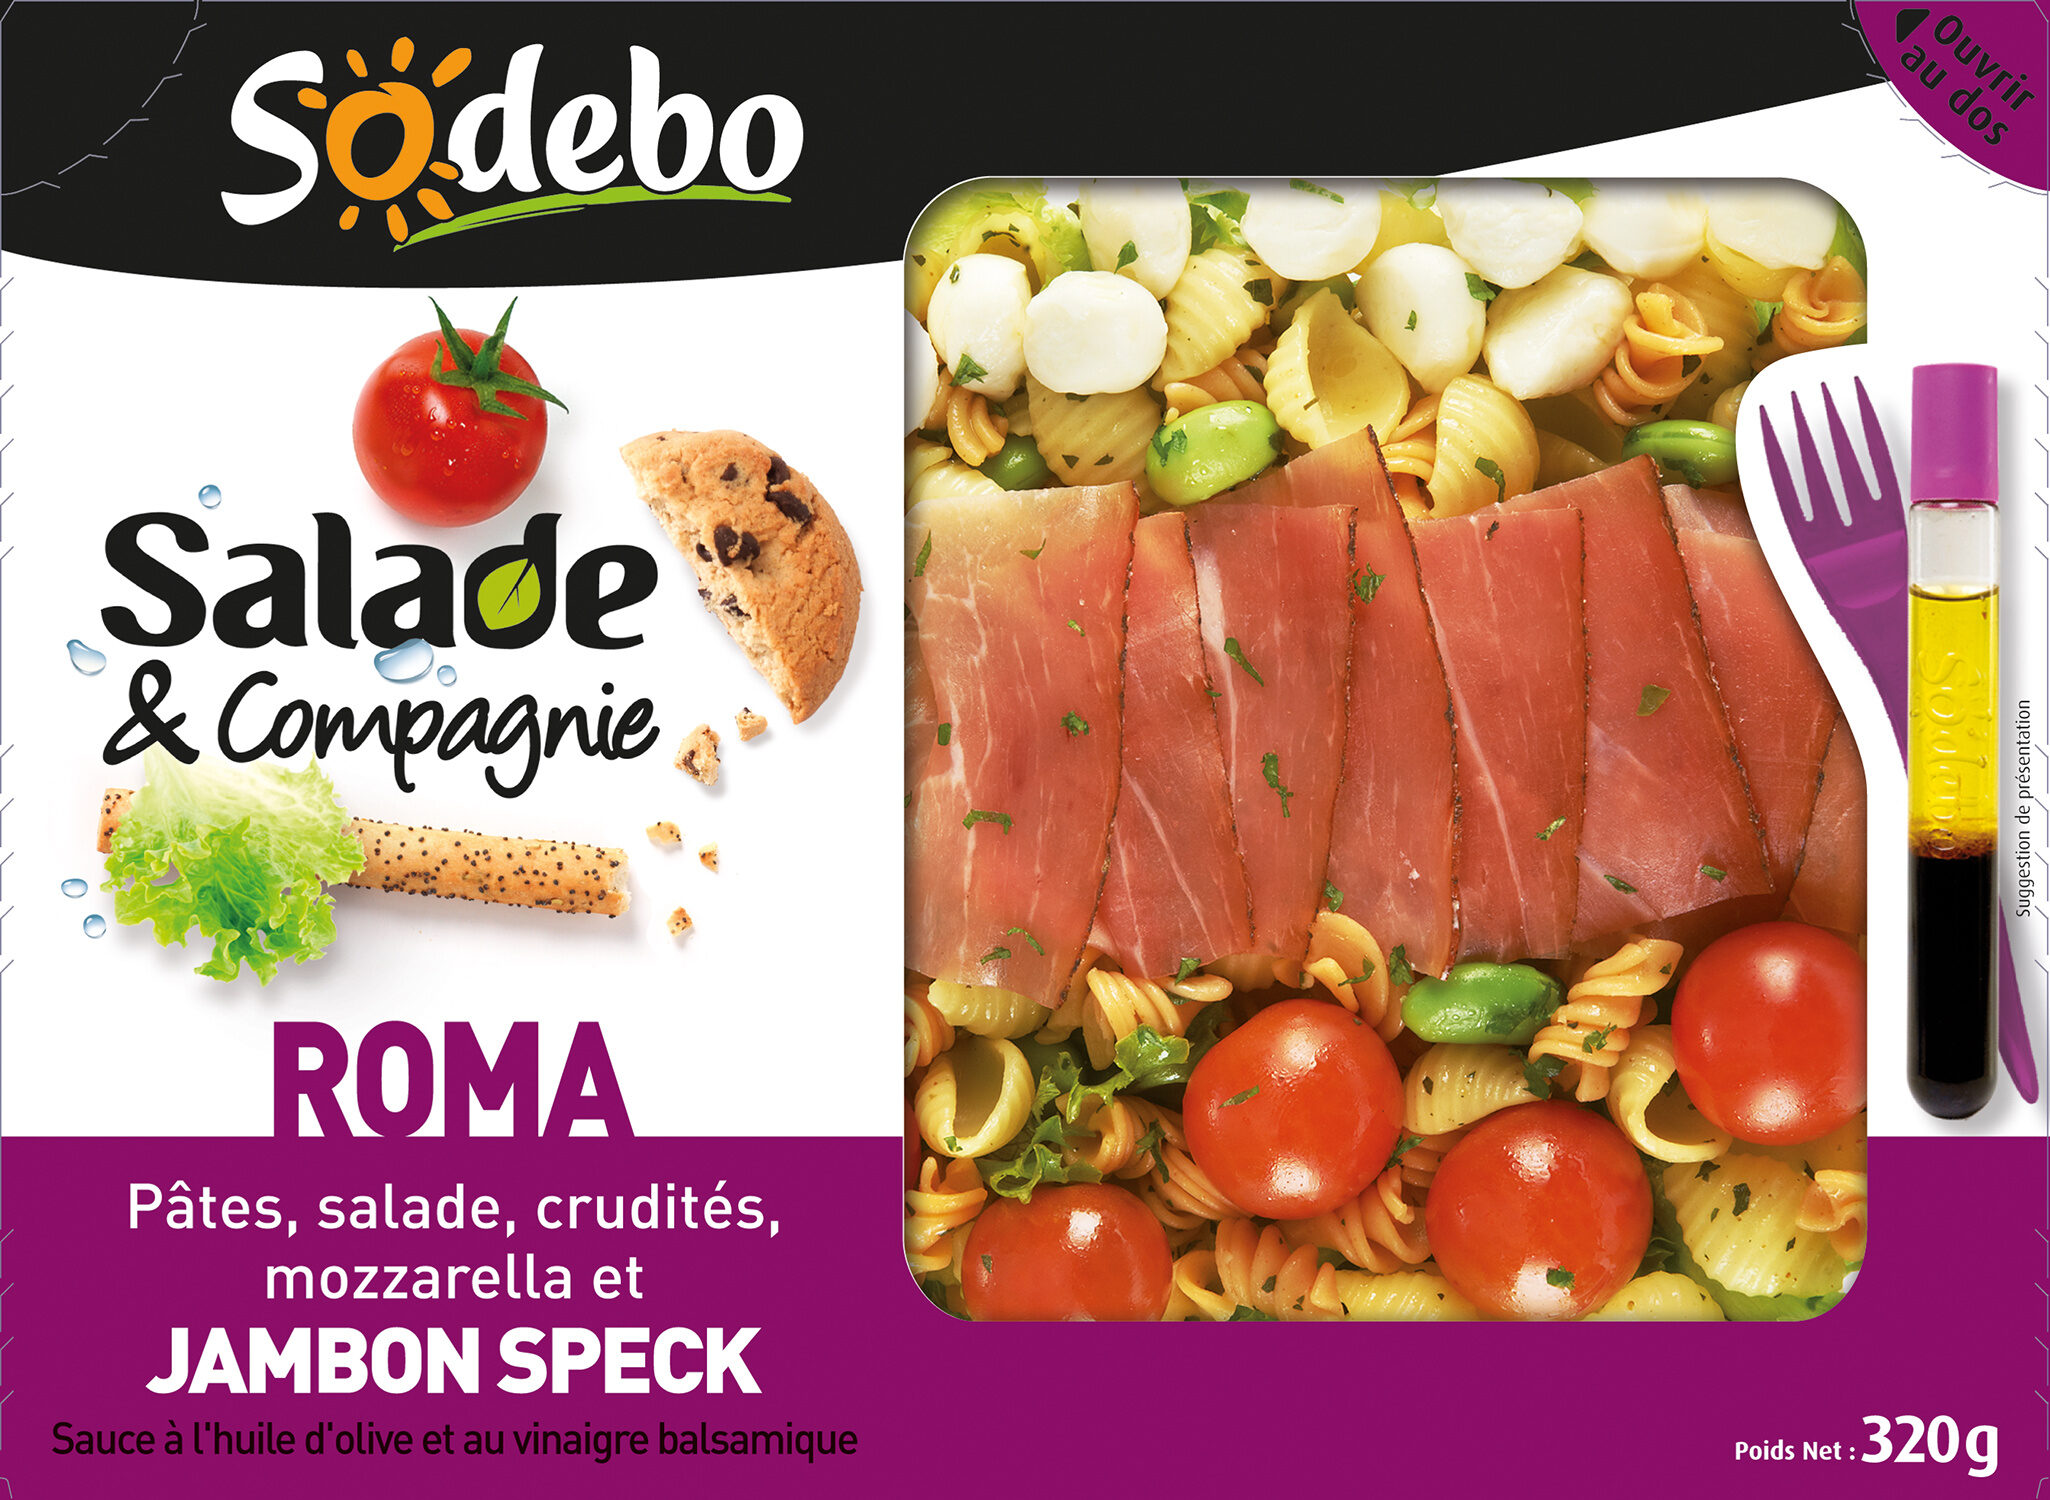 Salade & Compagnie - Roma - Product - fr